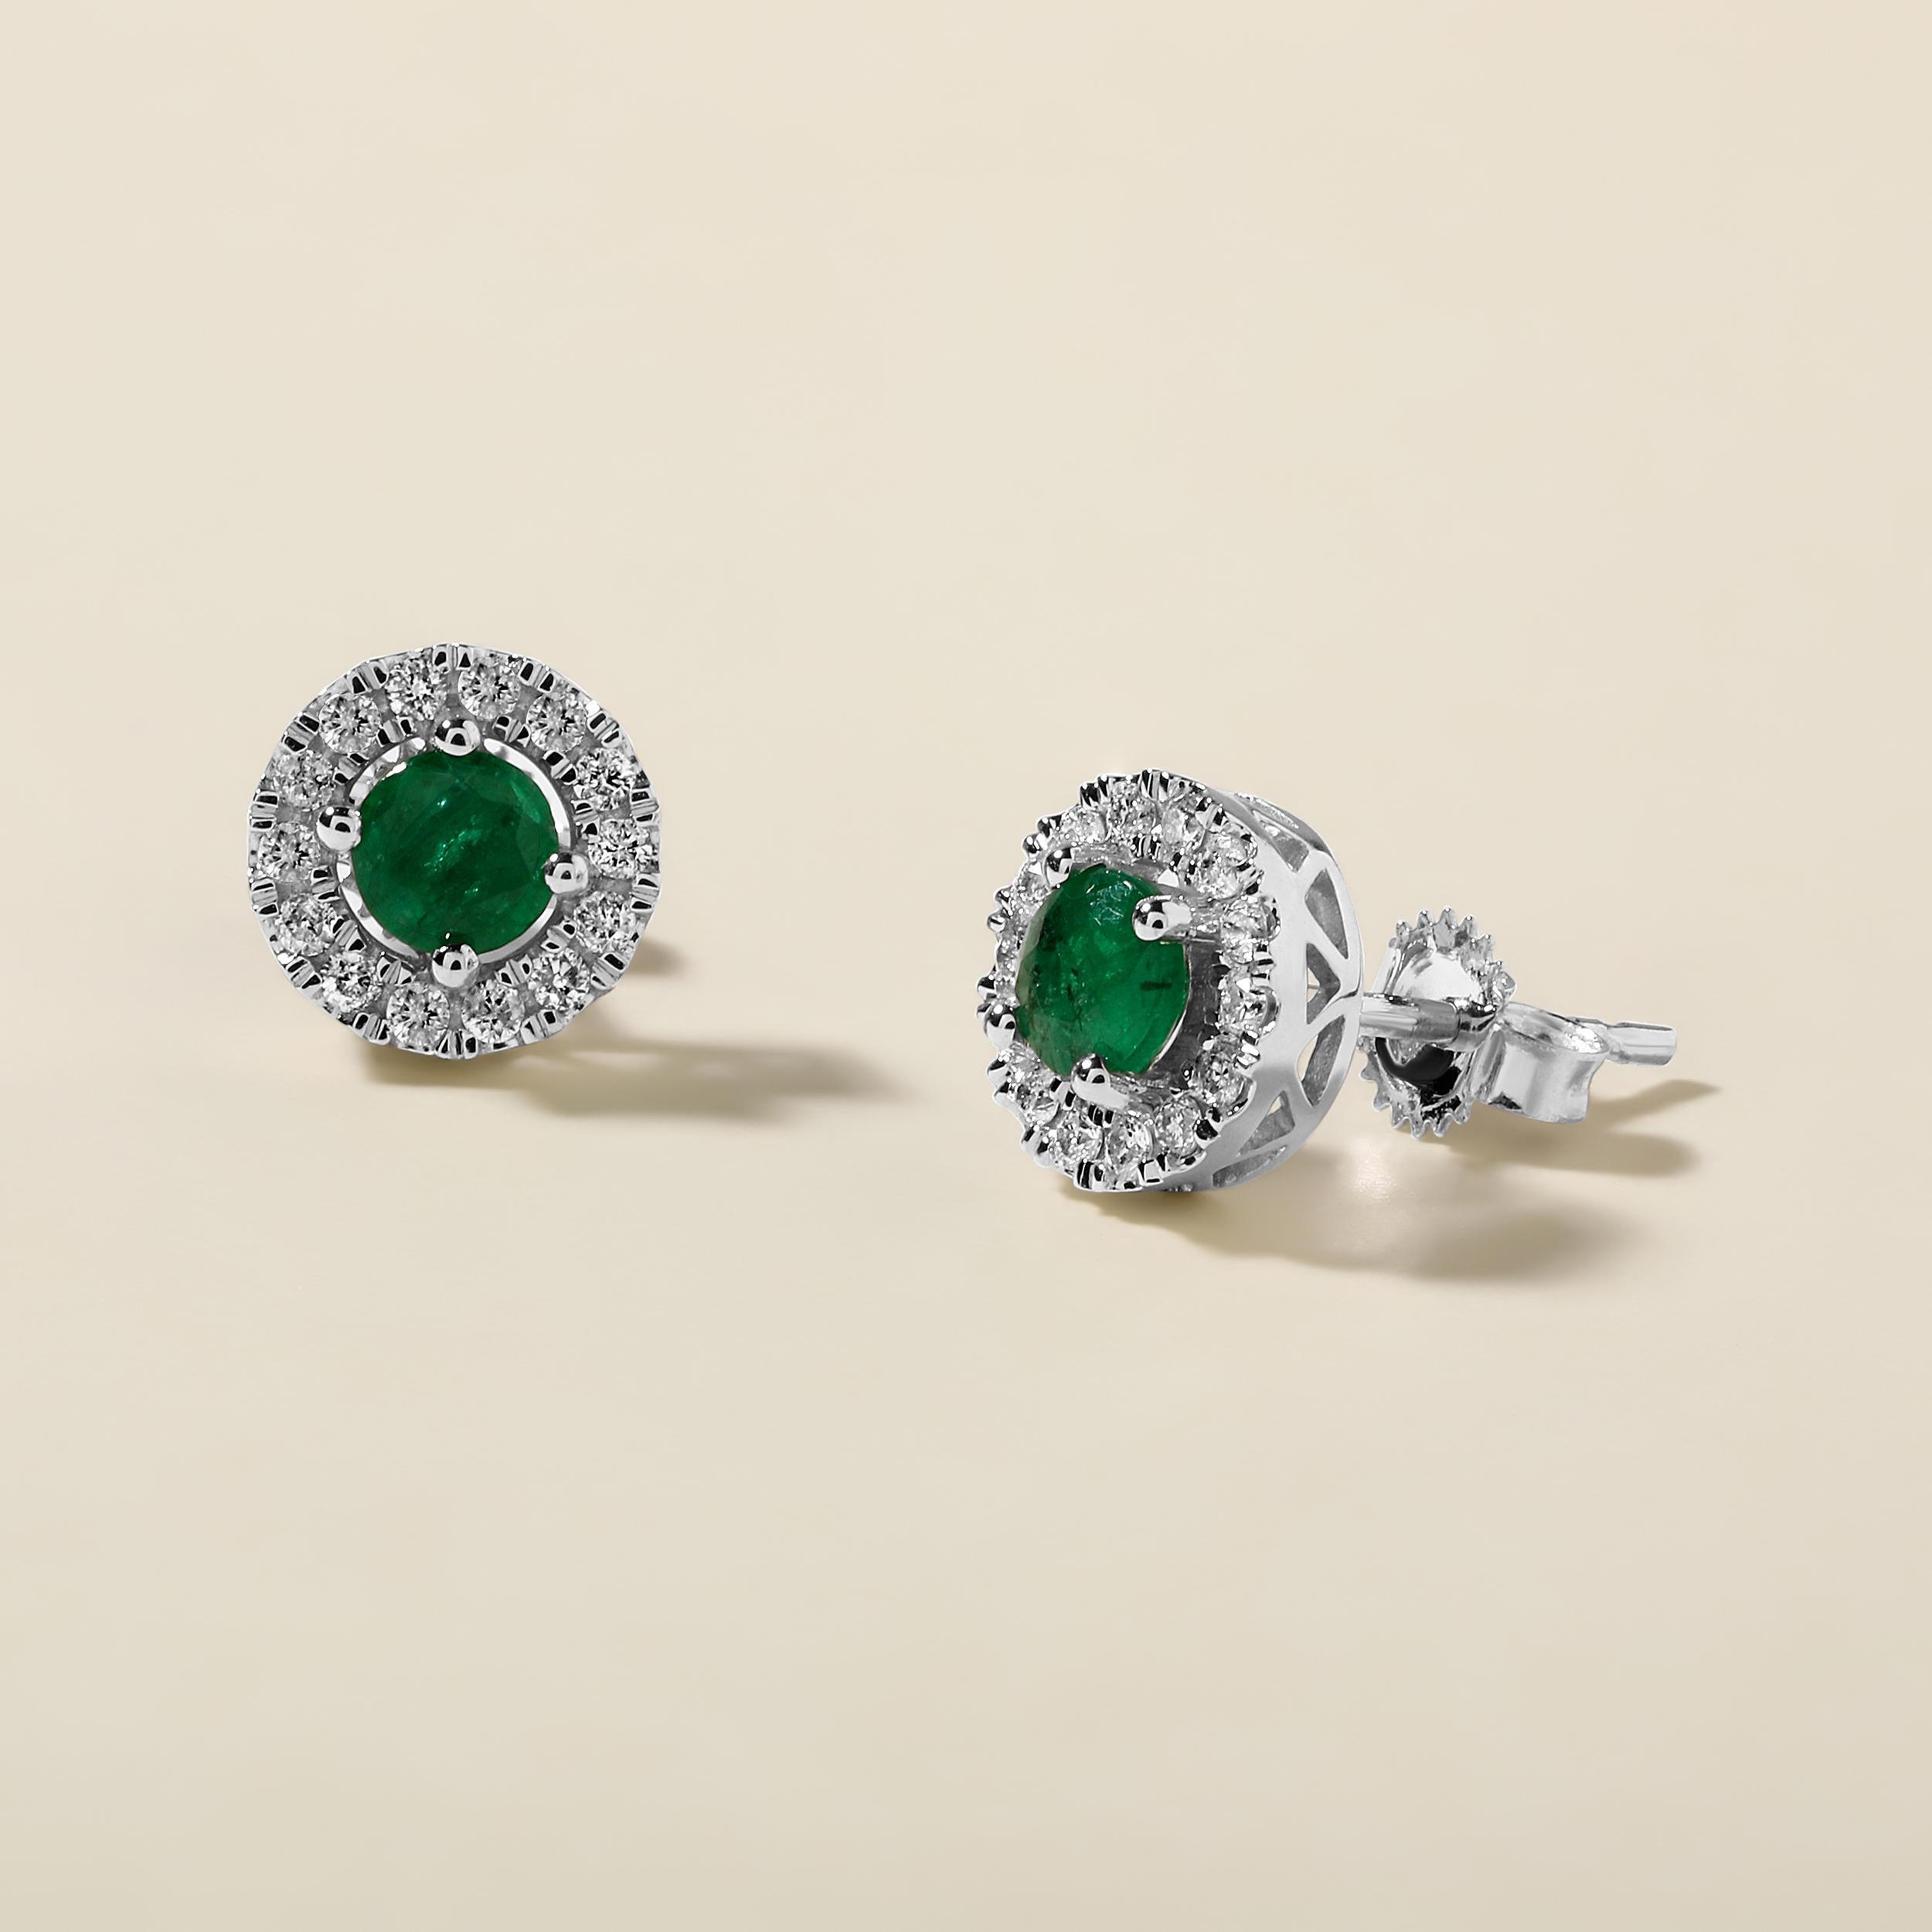 Crafted in 2.44 grams of 14K White Gold, the earrings contain 36 stones of Round Natural Diamonds with a total of 0.29 carat in F-G color and I1-I2 clarity combined with 2 stones of Round Shaped Natural Emerald Gemstones with a total of 1.12